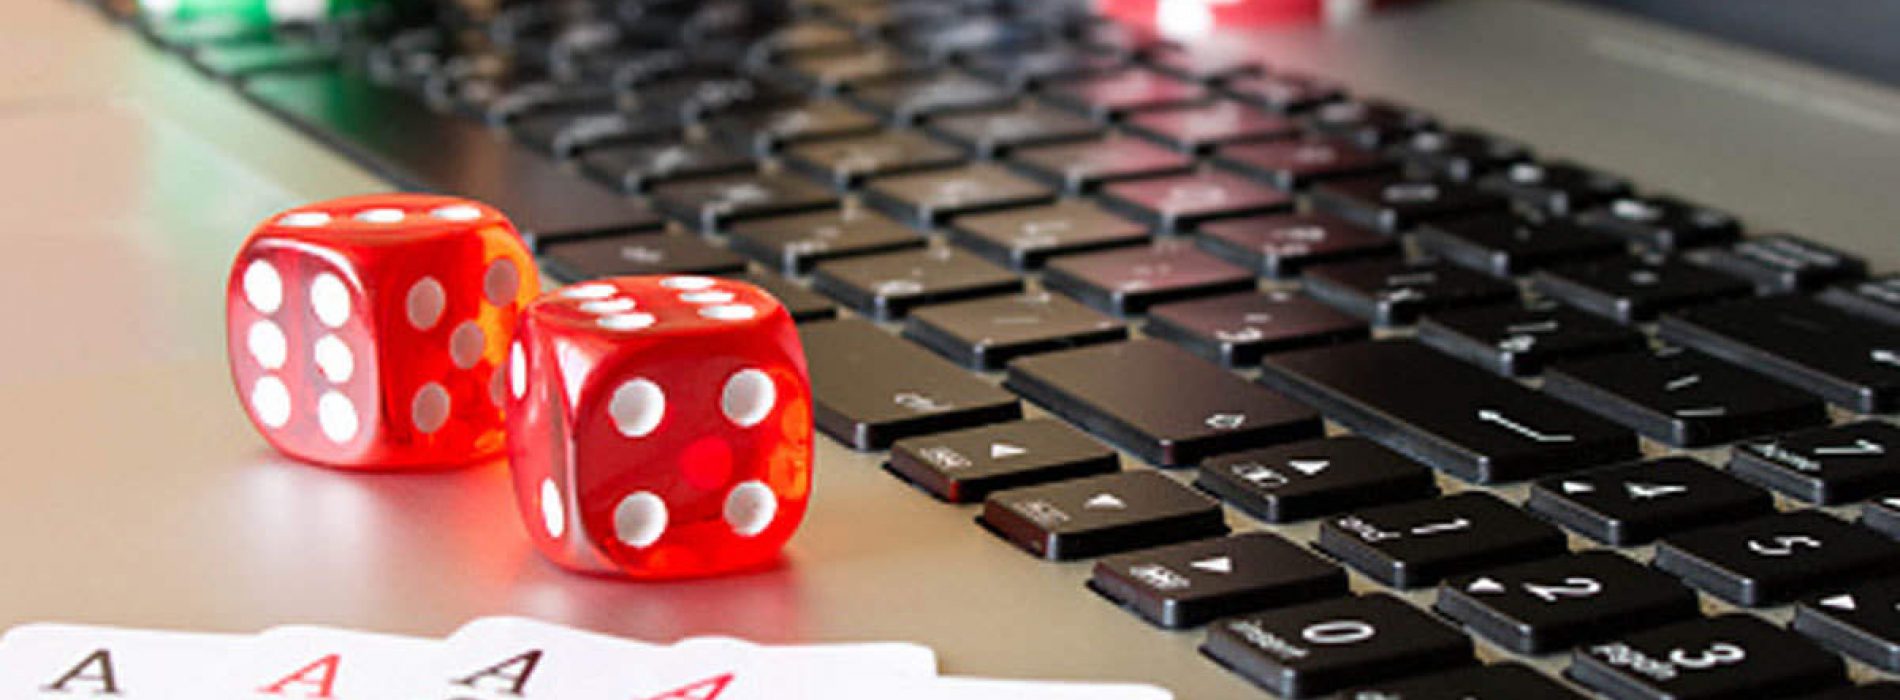 5 factors to consider before choosing an online casino to play baccarat at